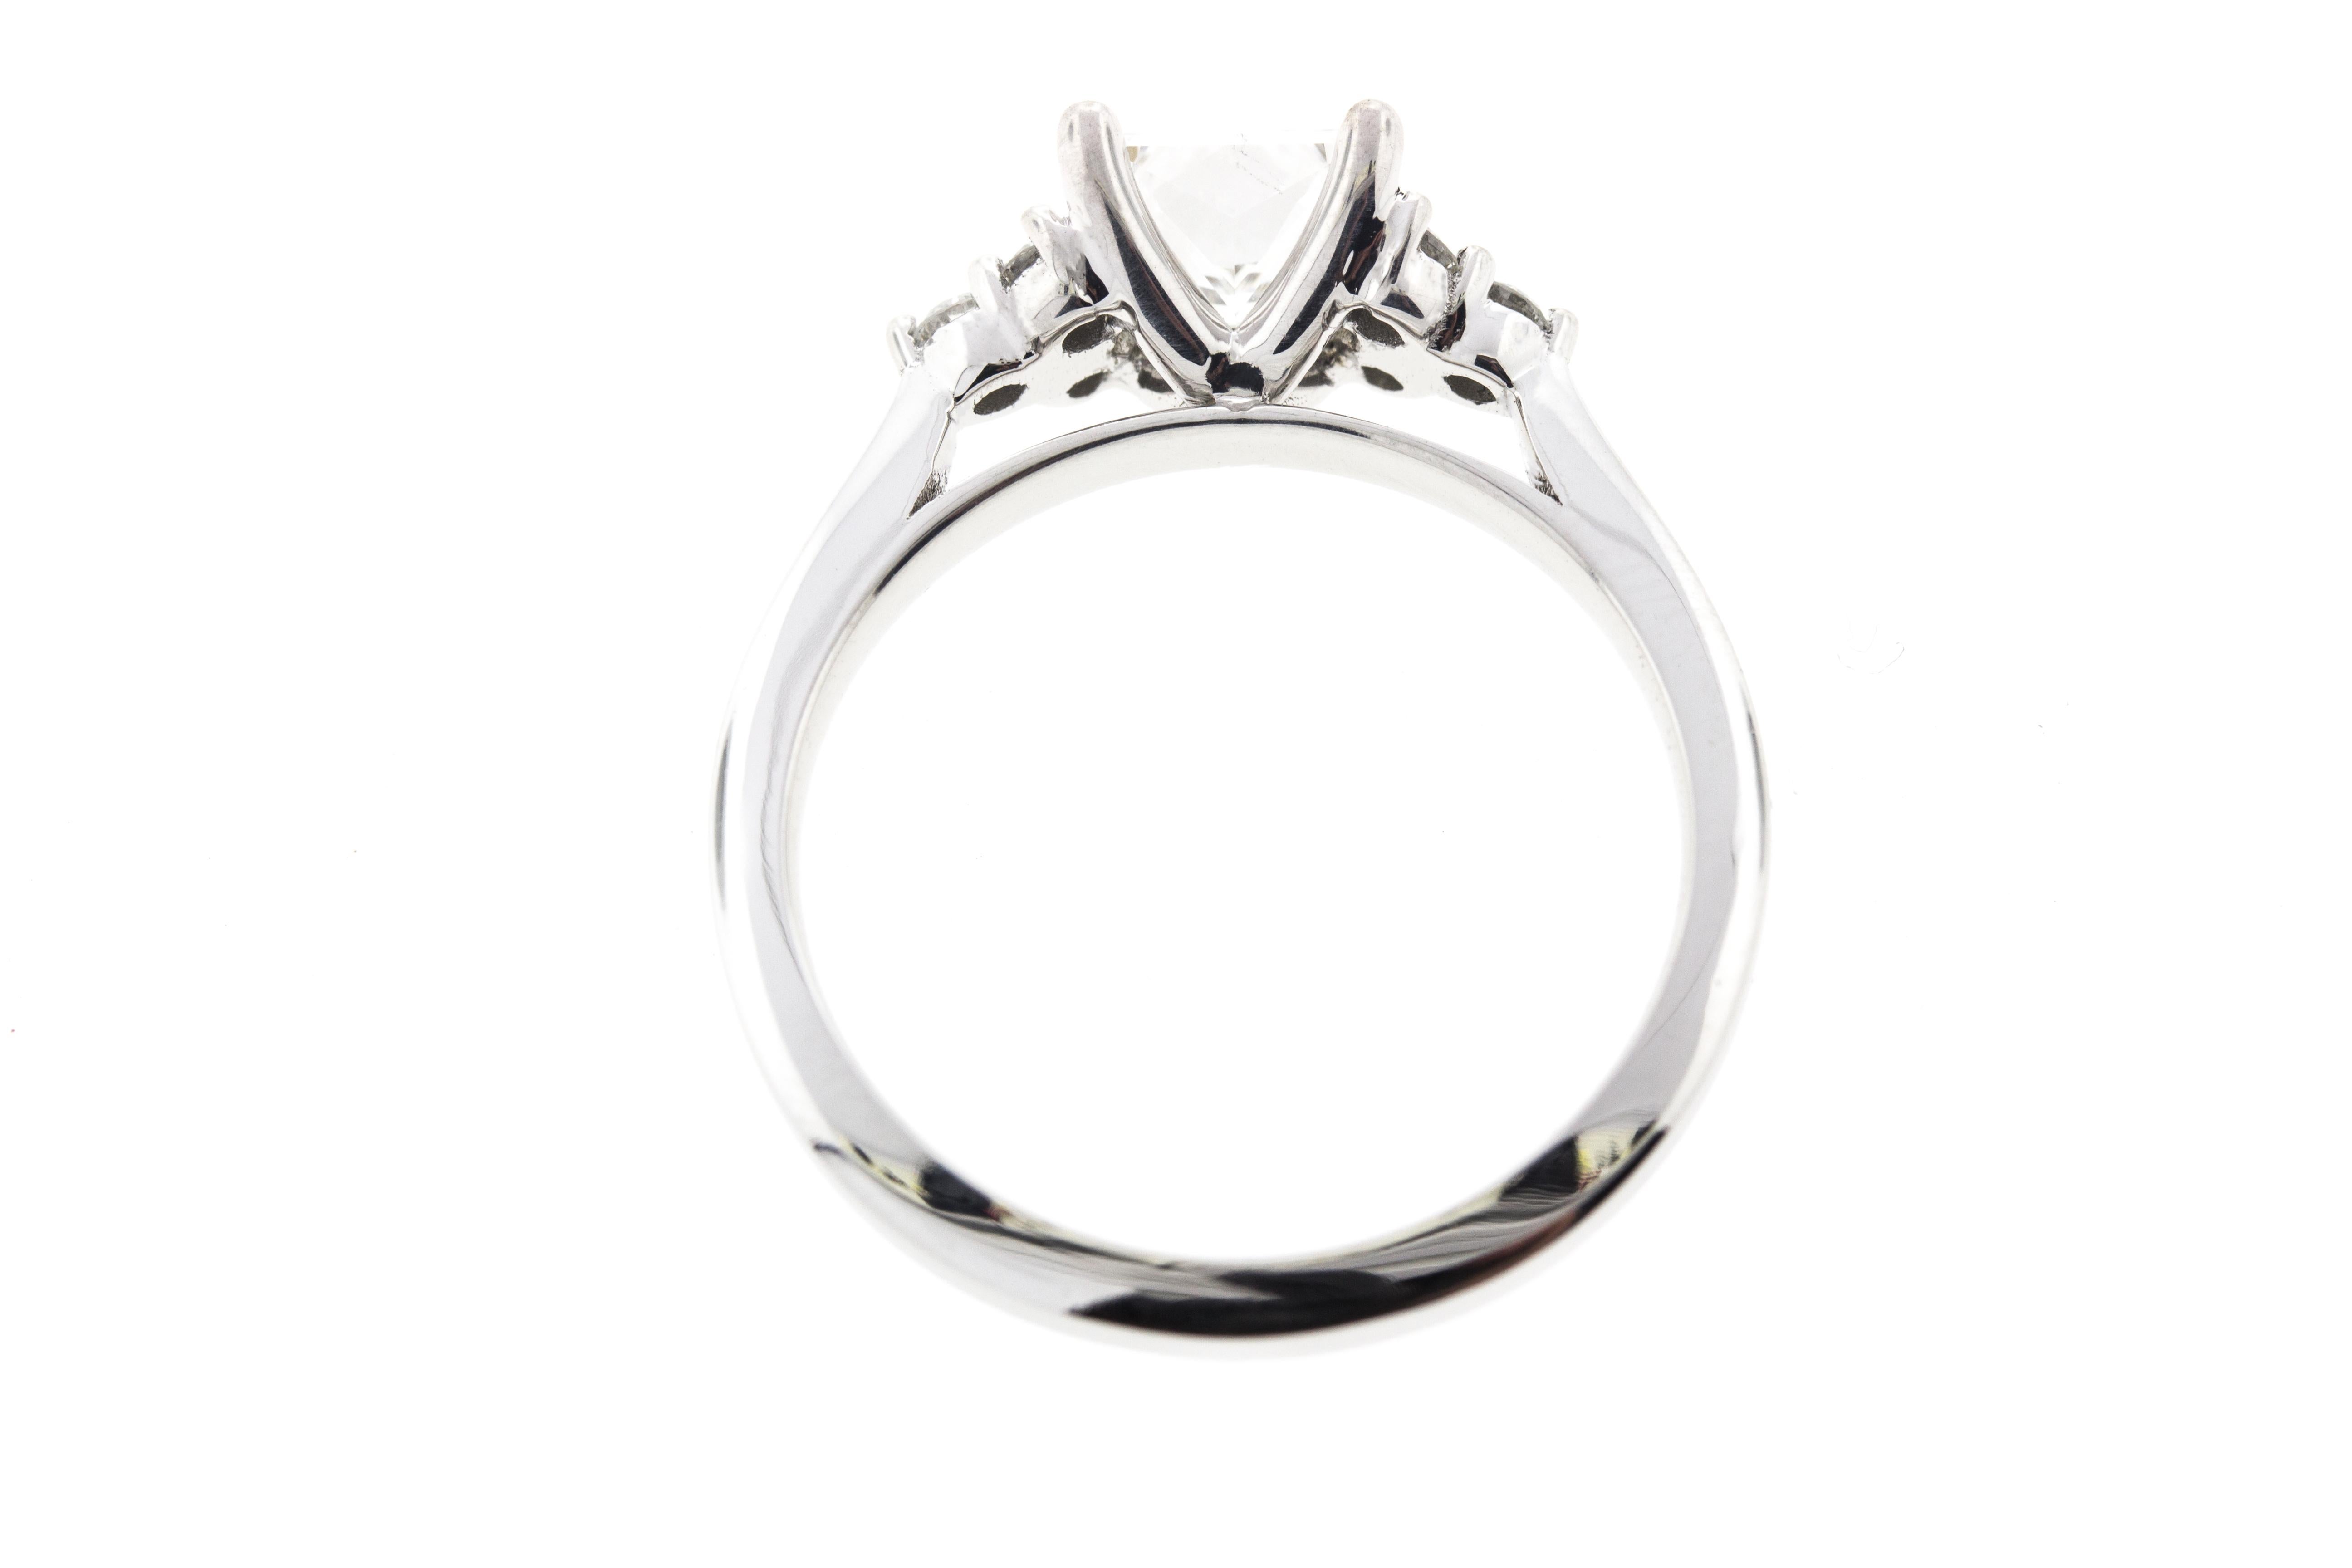 This ring is crafted in 14k white gold and contains an Princess Cut Diamond (1.07 total carat weight, E color, VS2 clarity,  surrounded by 6 Round Brilliant Cut Diamonds (0.24 total carat weight, F color, VS clarity).

Please note that each piece we